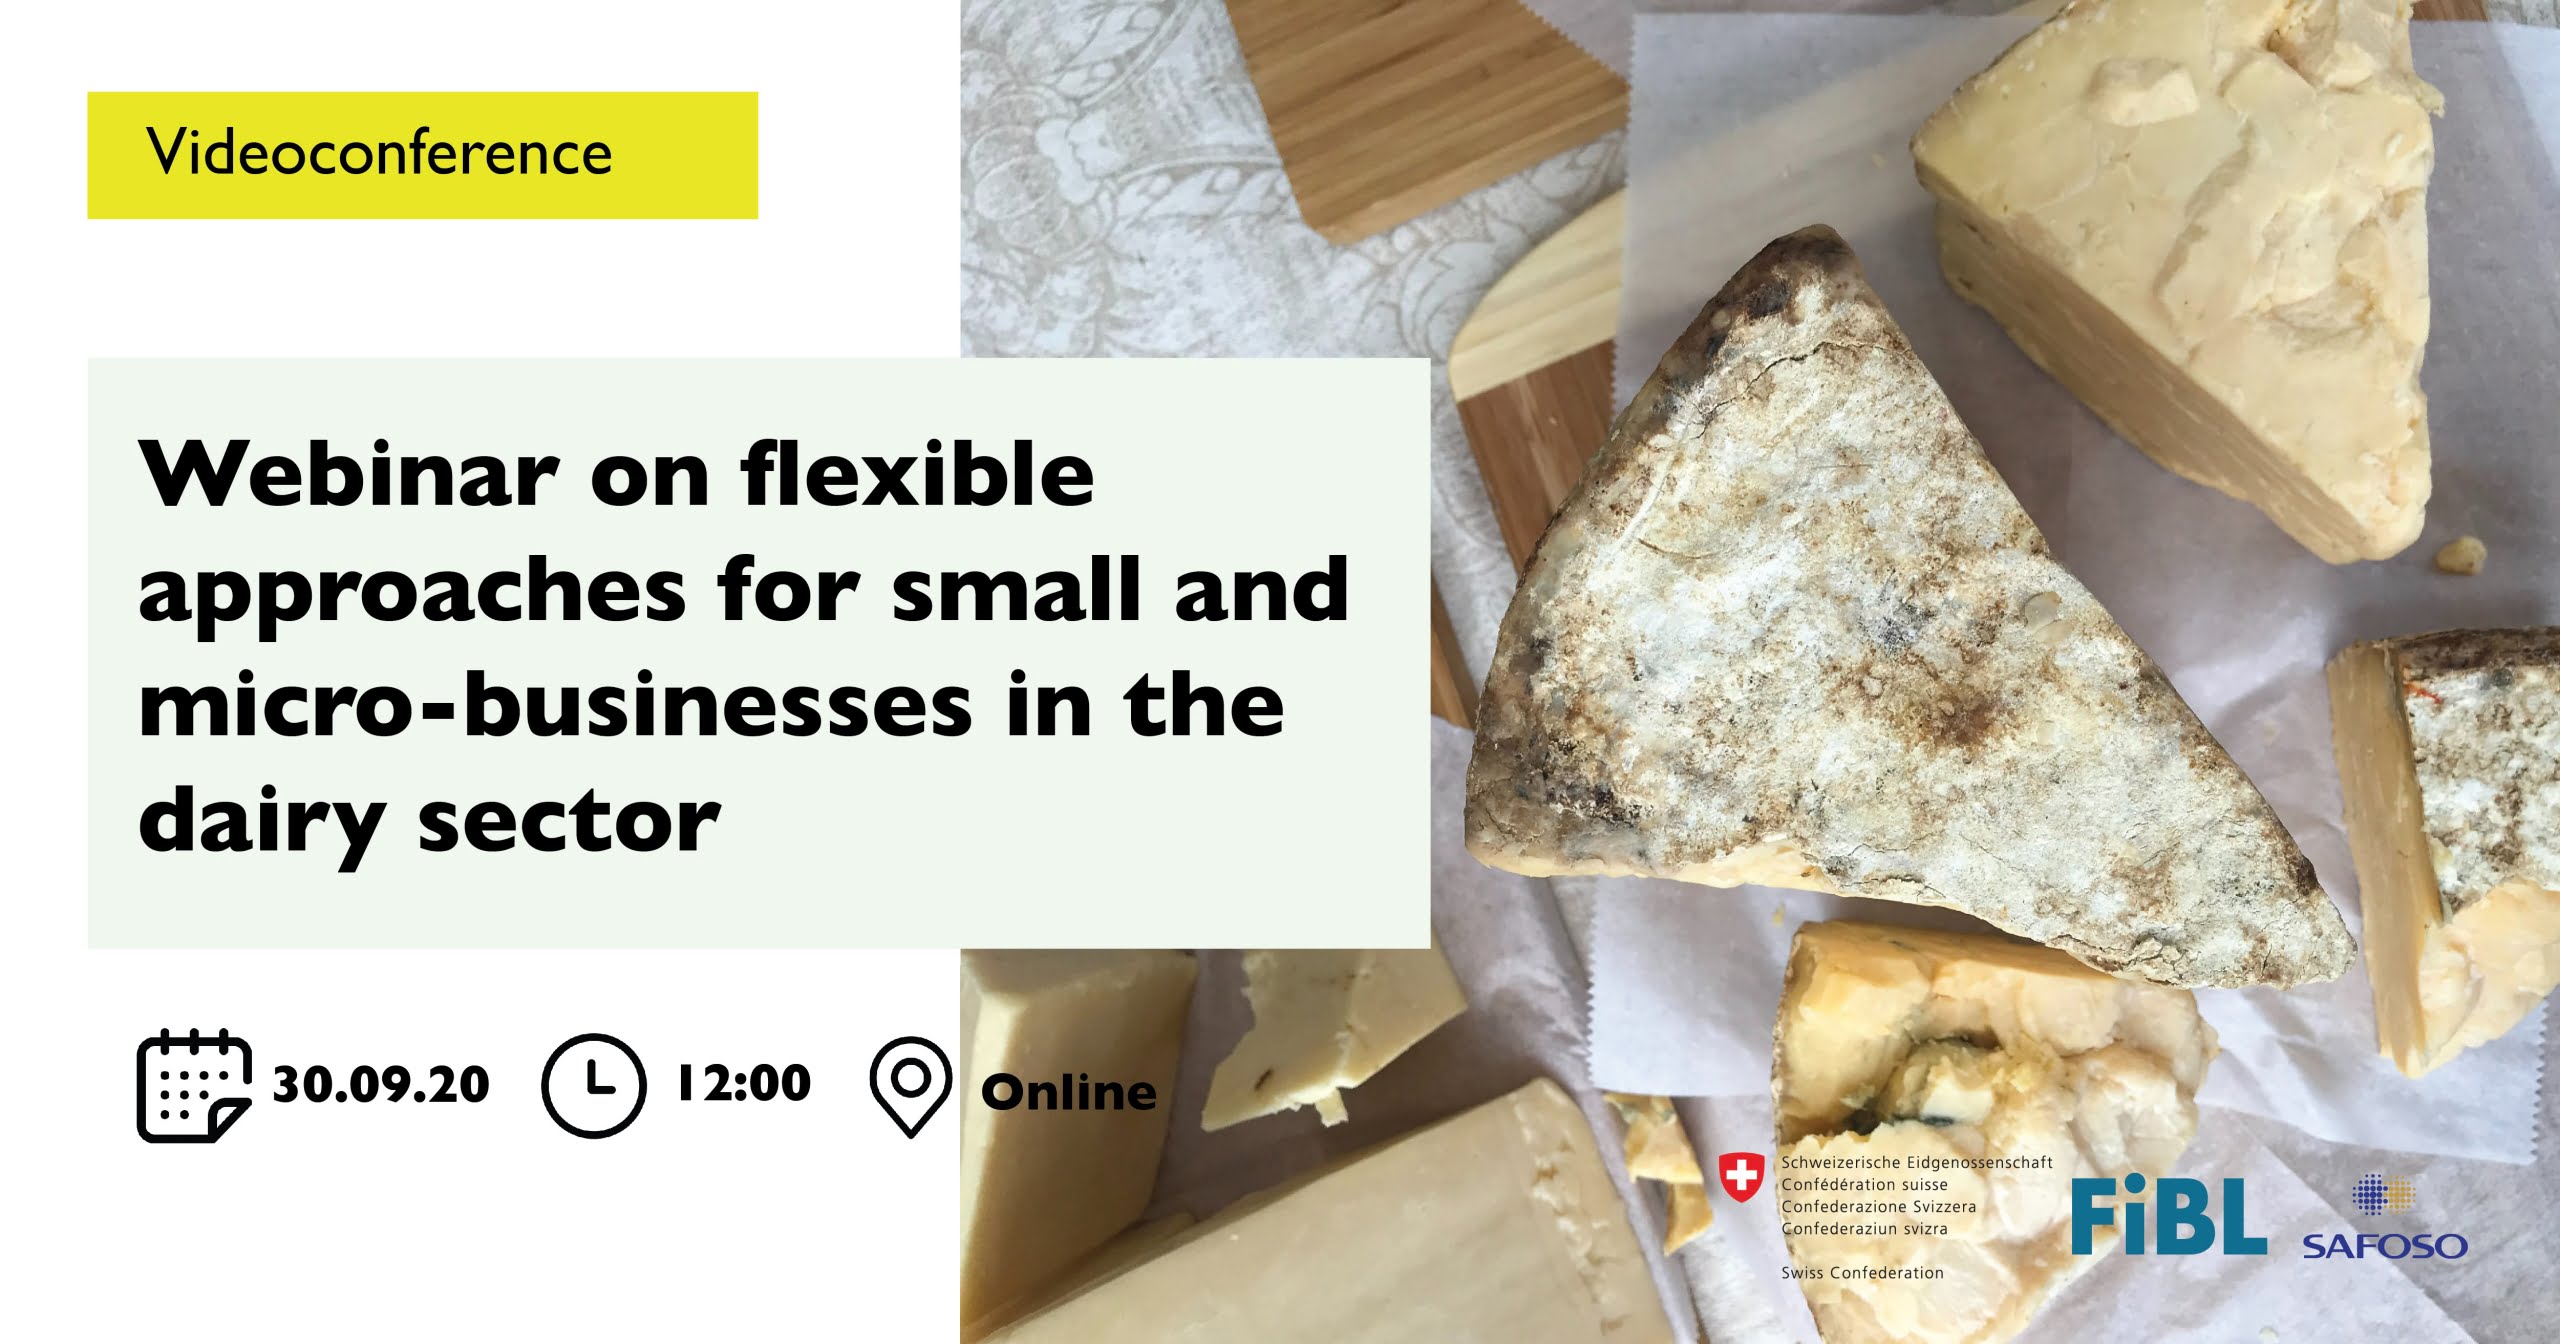 Webinar on flexible approaches for small and micro-businesses in the dairy sector